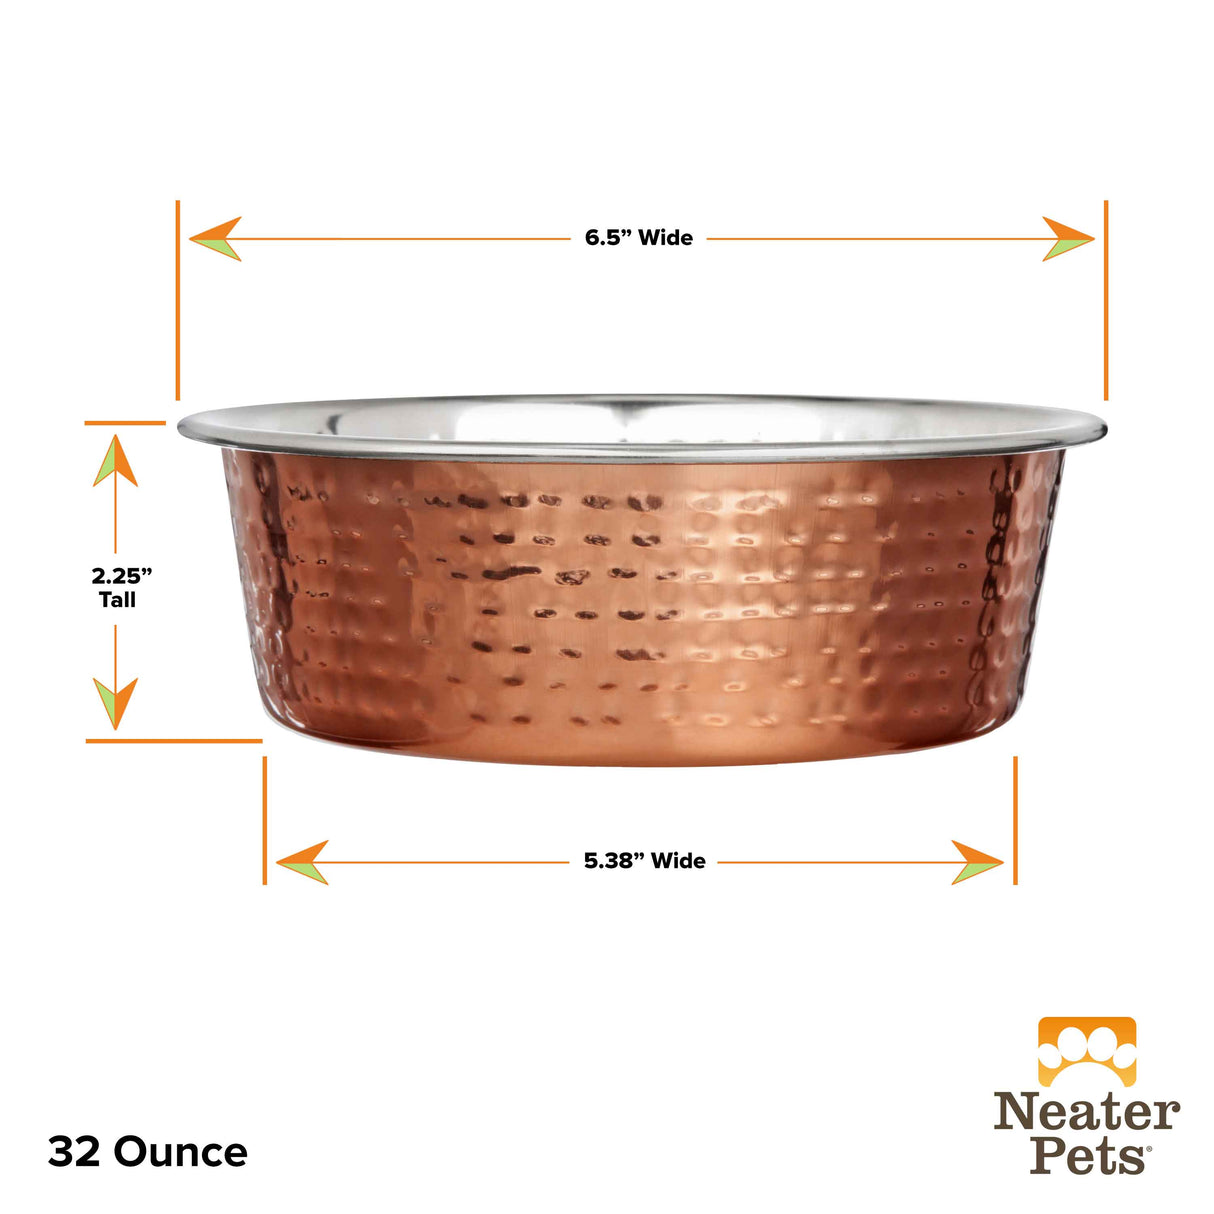 Dimensions of the 32 ounce Hammered Copper Finish Bowl